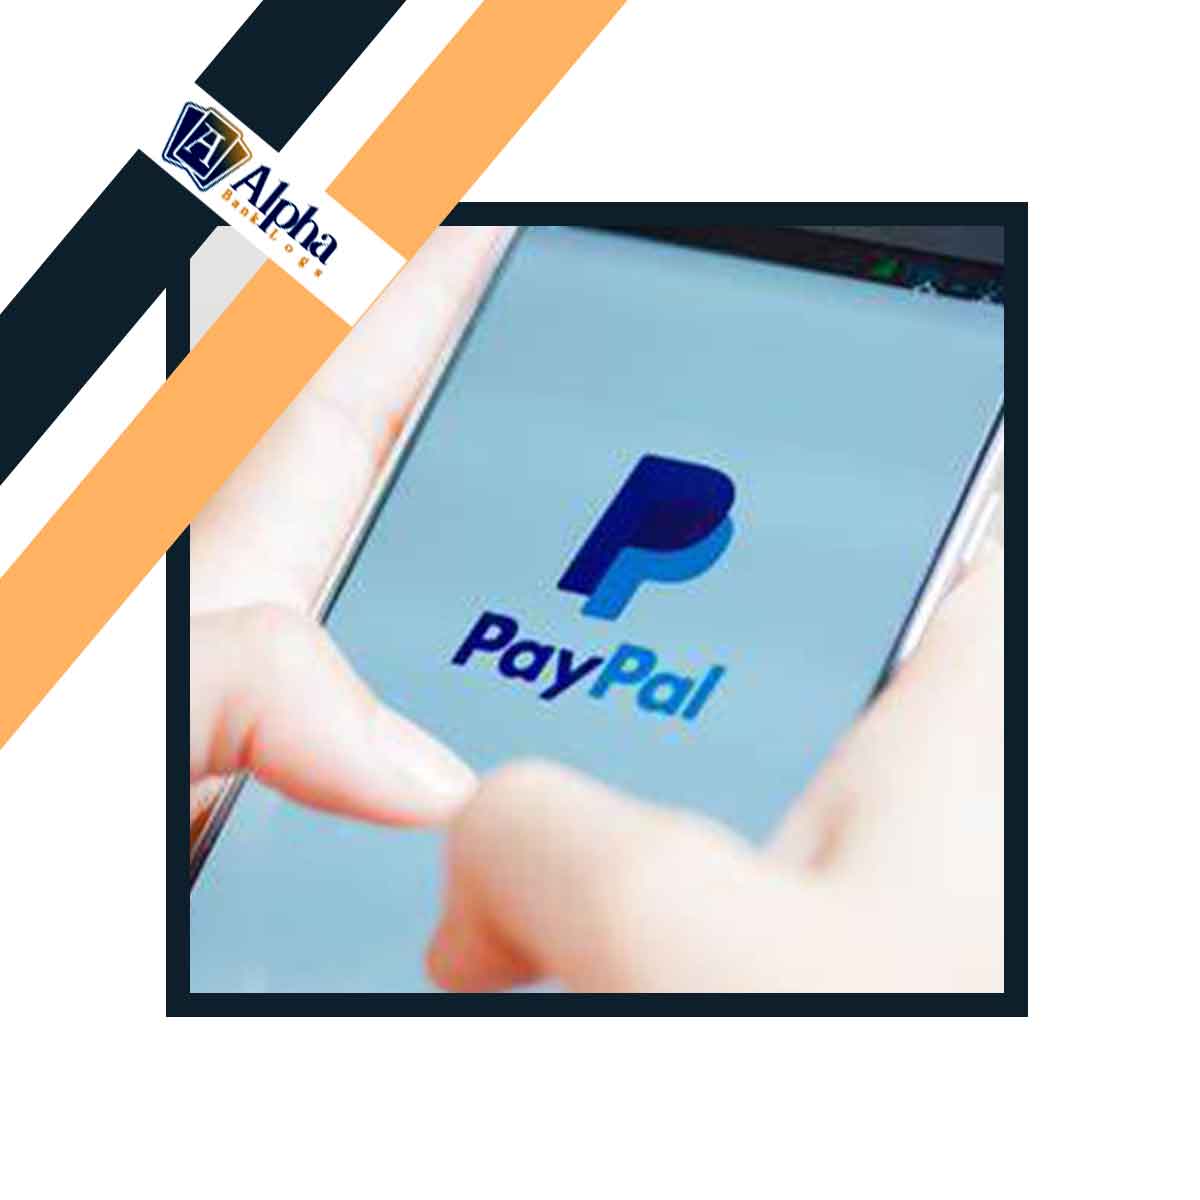 PayPal or a Credit Card?